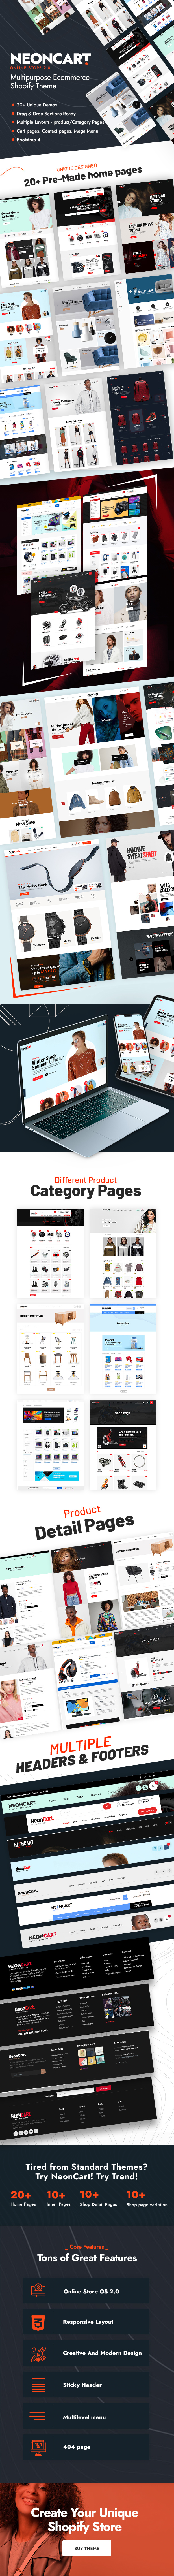 NeonCart - Multipurpose Ecommerce Shopify Template